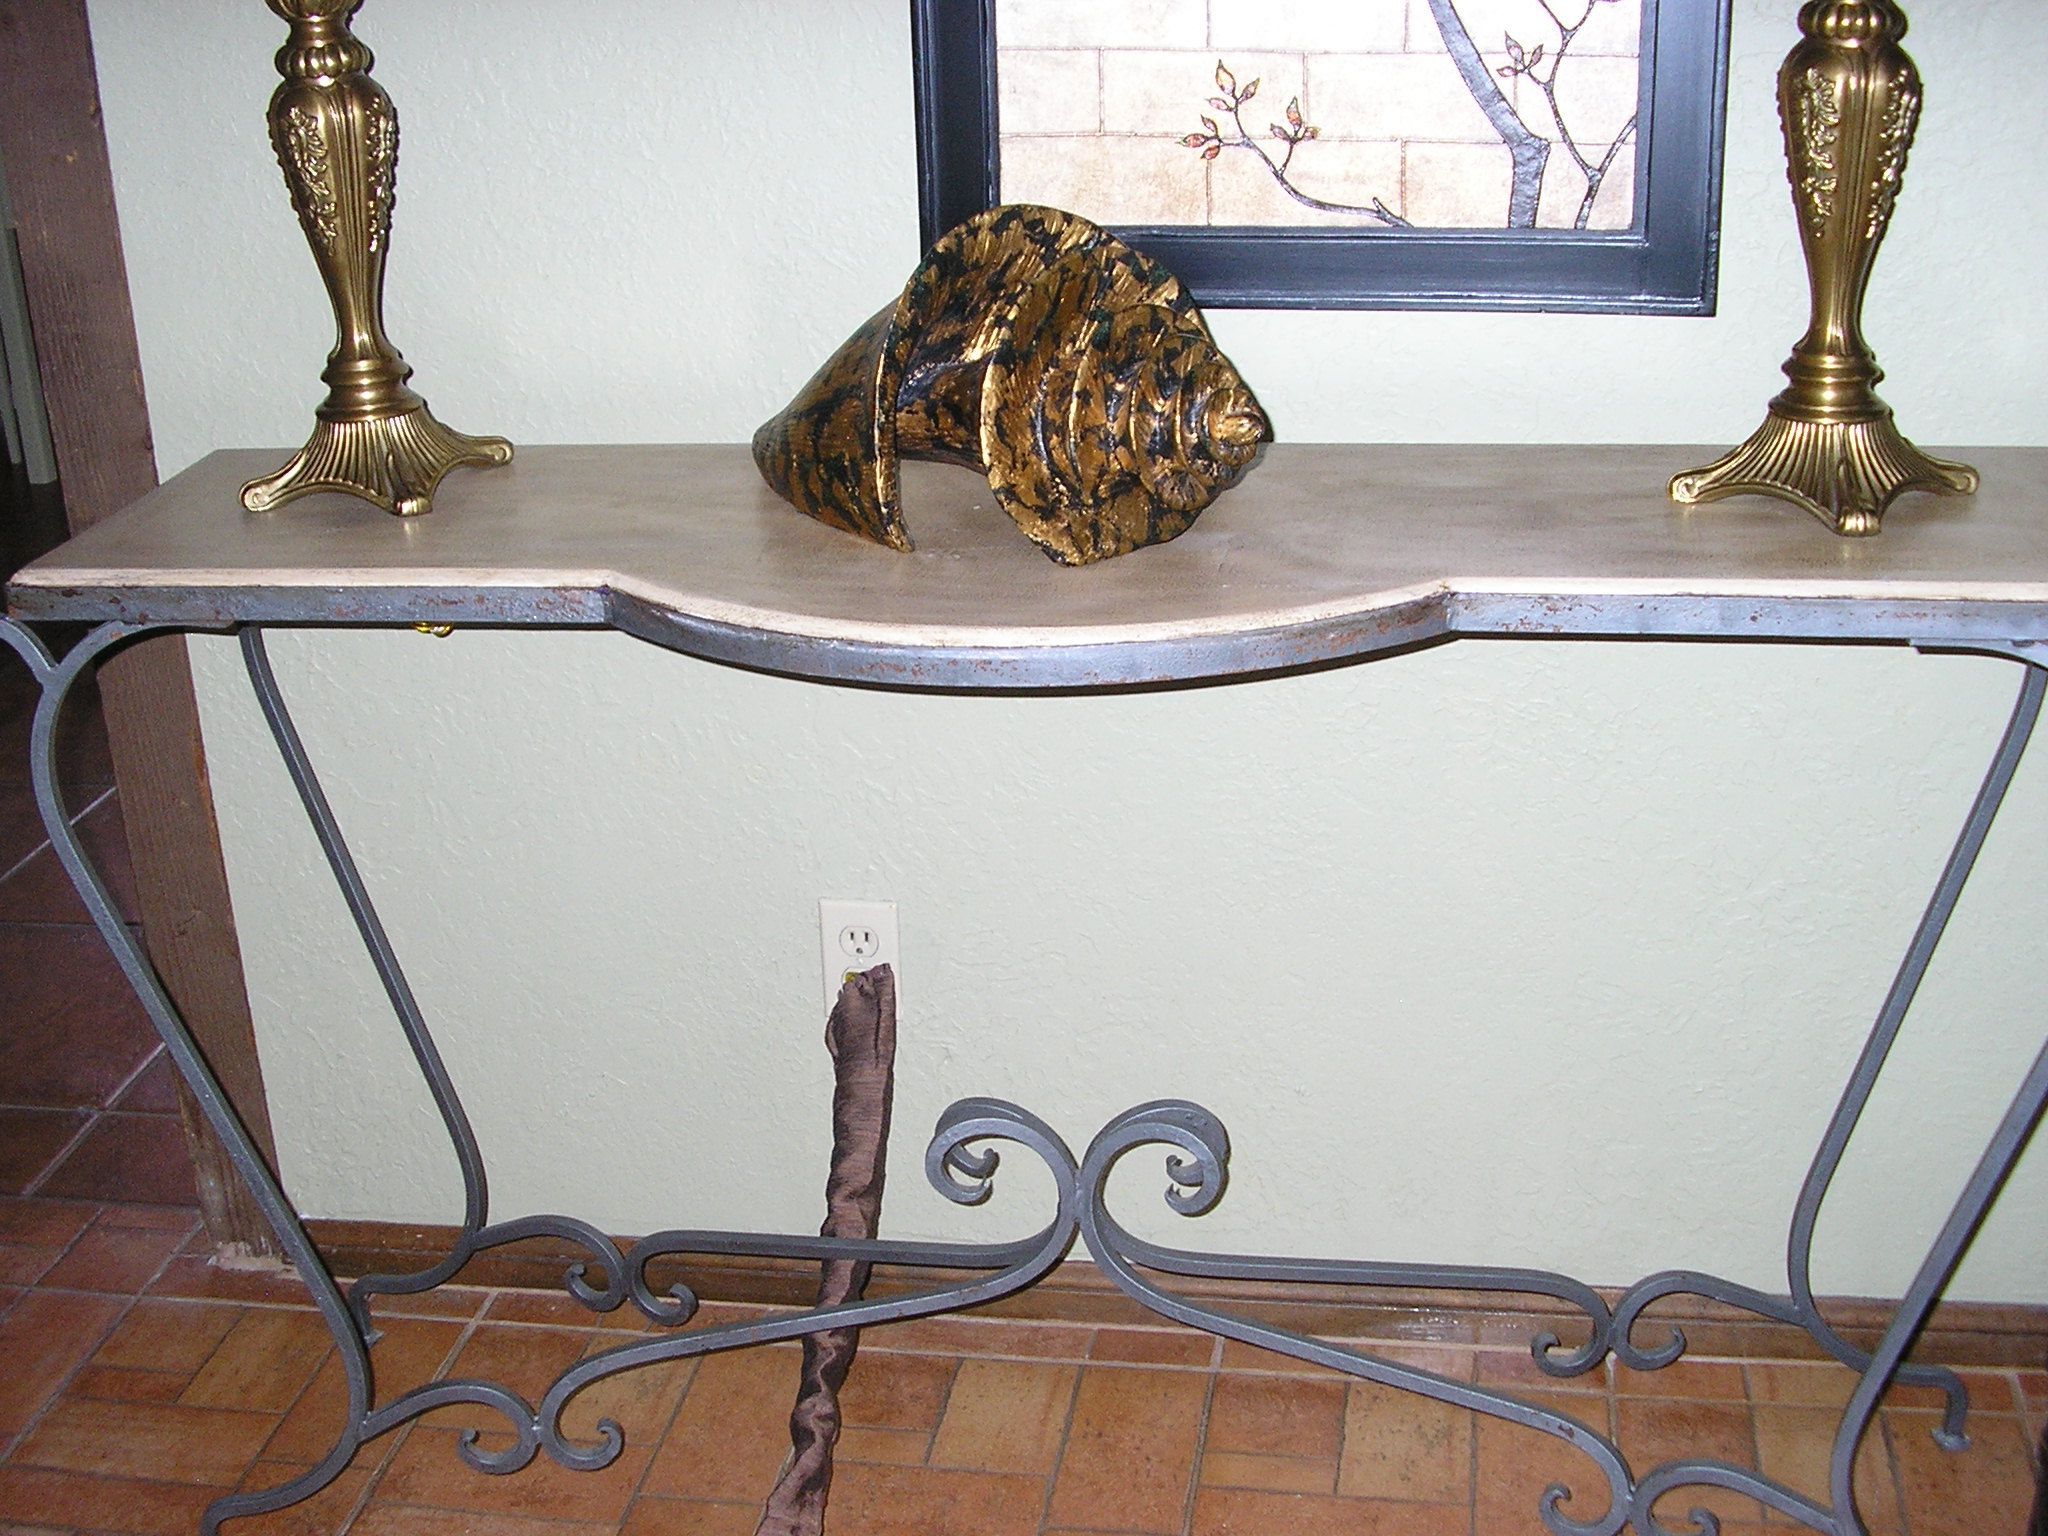 Preferred Beautiful Sofa Table With Wrought Iron Decorative Base Within Oval Aged Black Iron Console Tables (View 9 of 10)